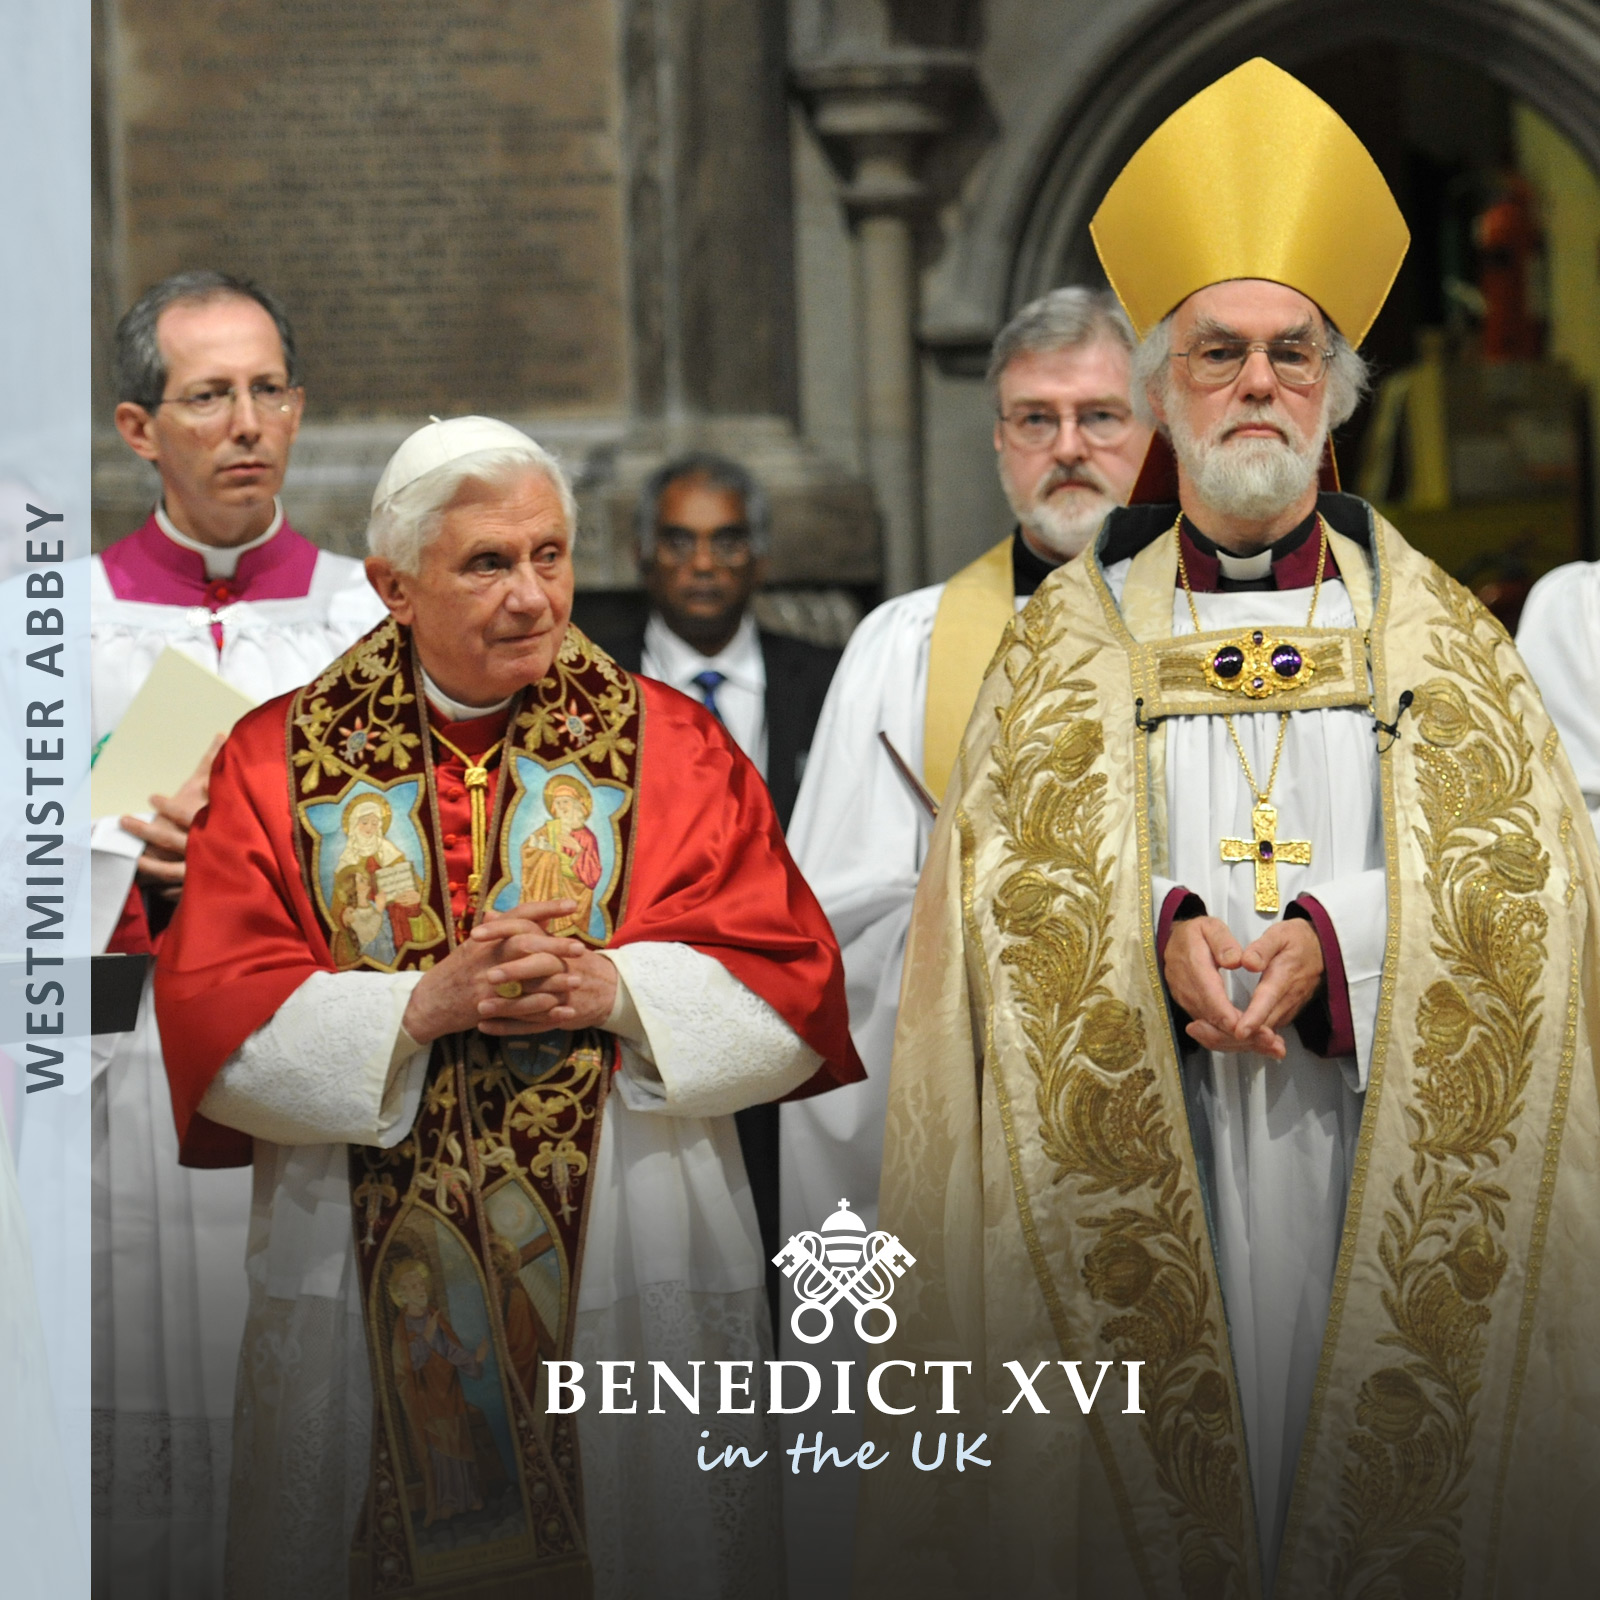 Pope Benedict and Archbishop of Canterbury speak at an Evensong service in Westminster Abbey